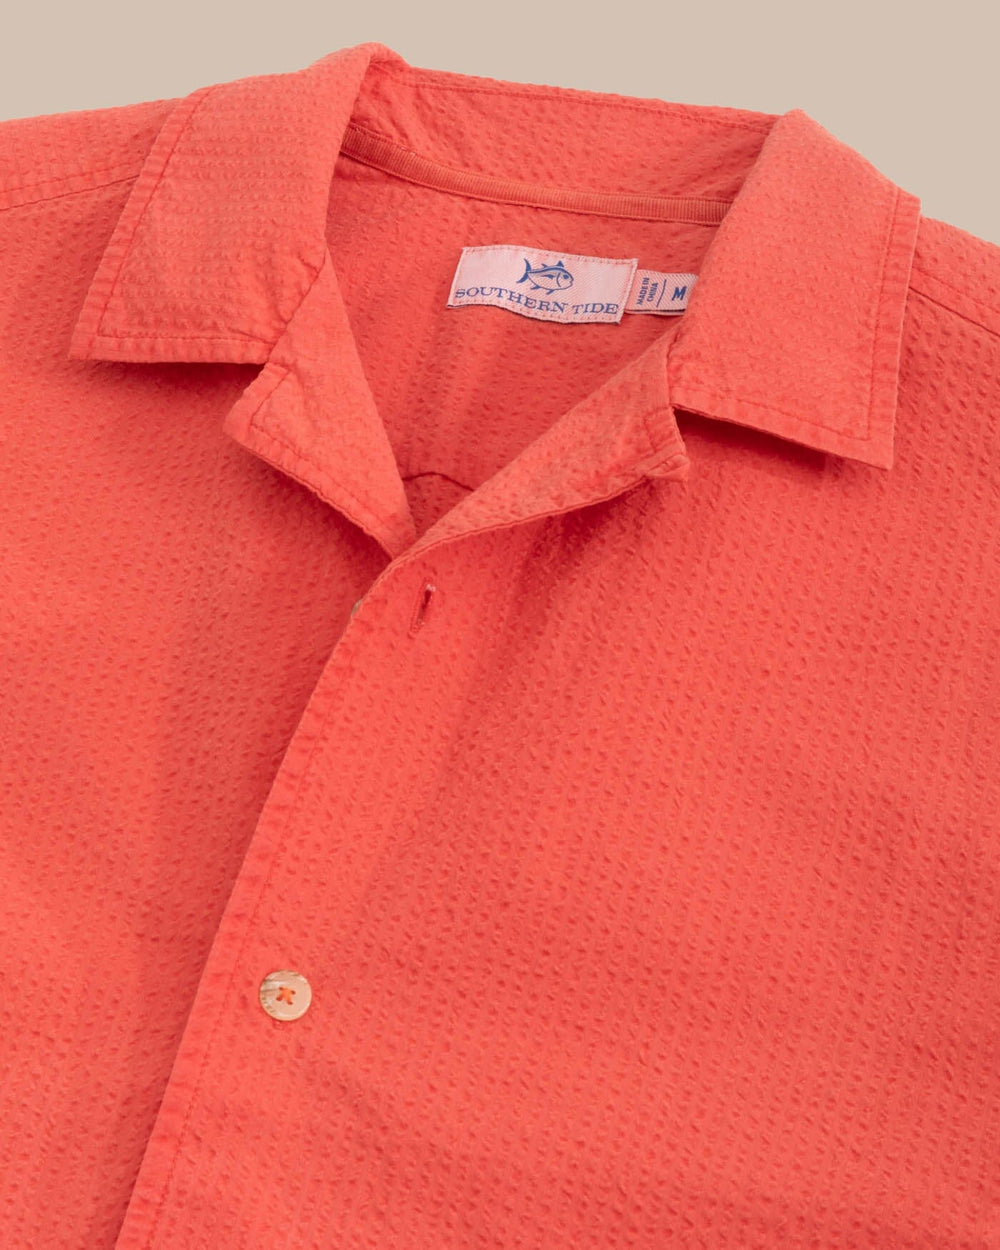 The detail view of the Southern Tide Sun Washed Seerscuker Camp Short Sleeve Sport Shirt by Southern Tide - Paprika Red